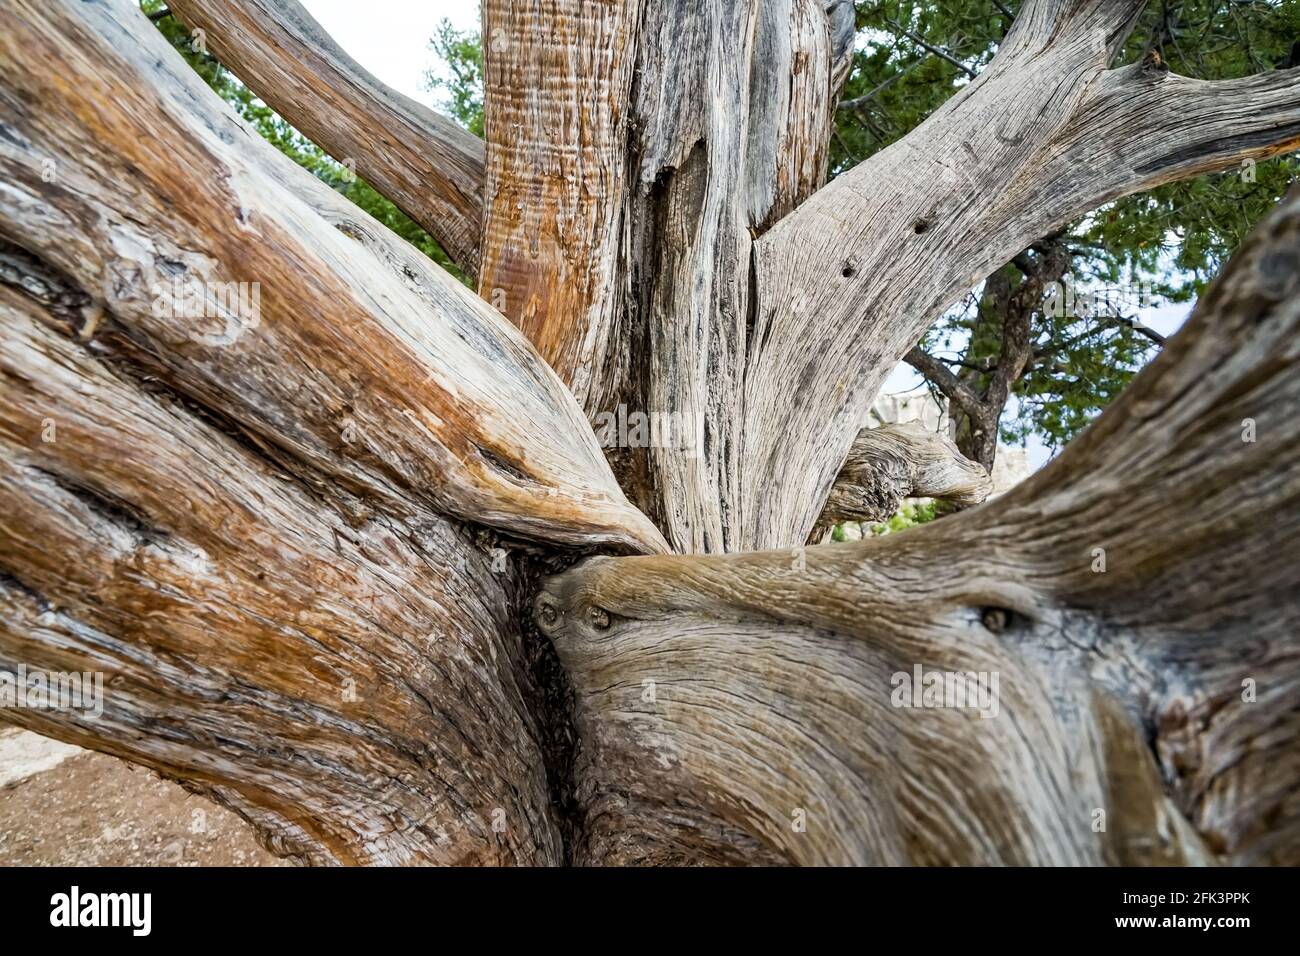 Huge branch fork in a gnarled old pine tree seen in a close-up Stock Photo